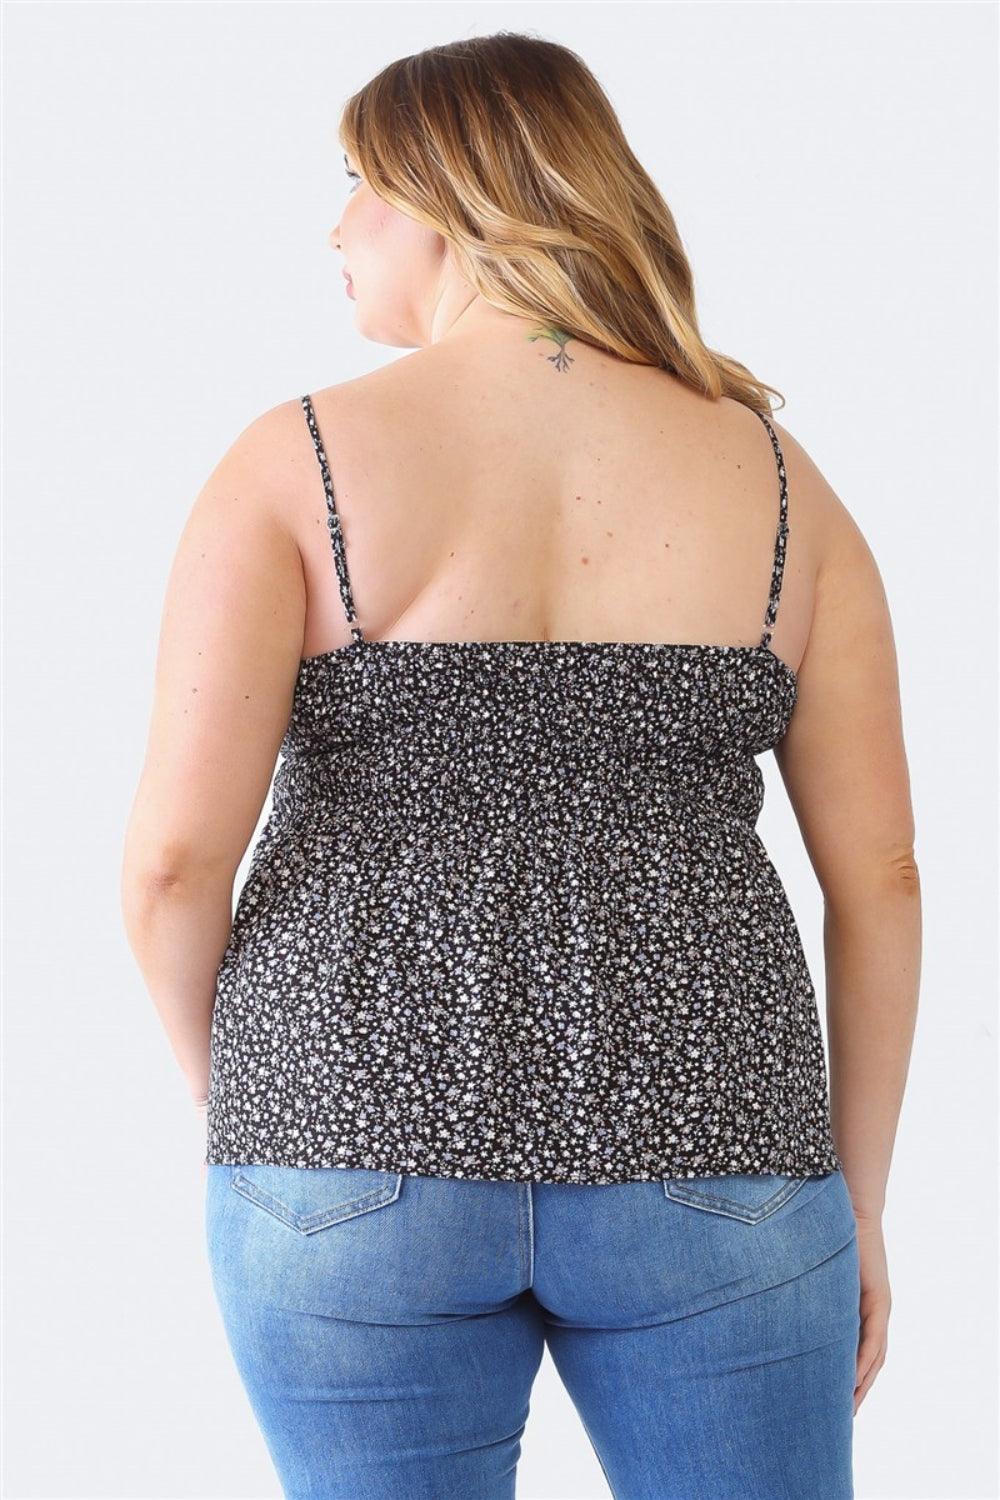 Zenobia Plus Size Frill Smocked Floral Sweetheart Neck Cami - Anchored Feather Boutique